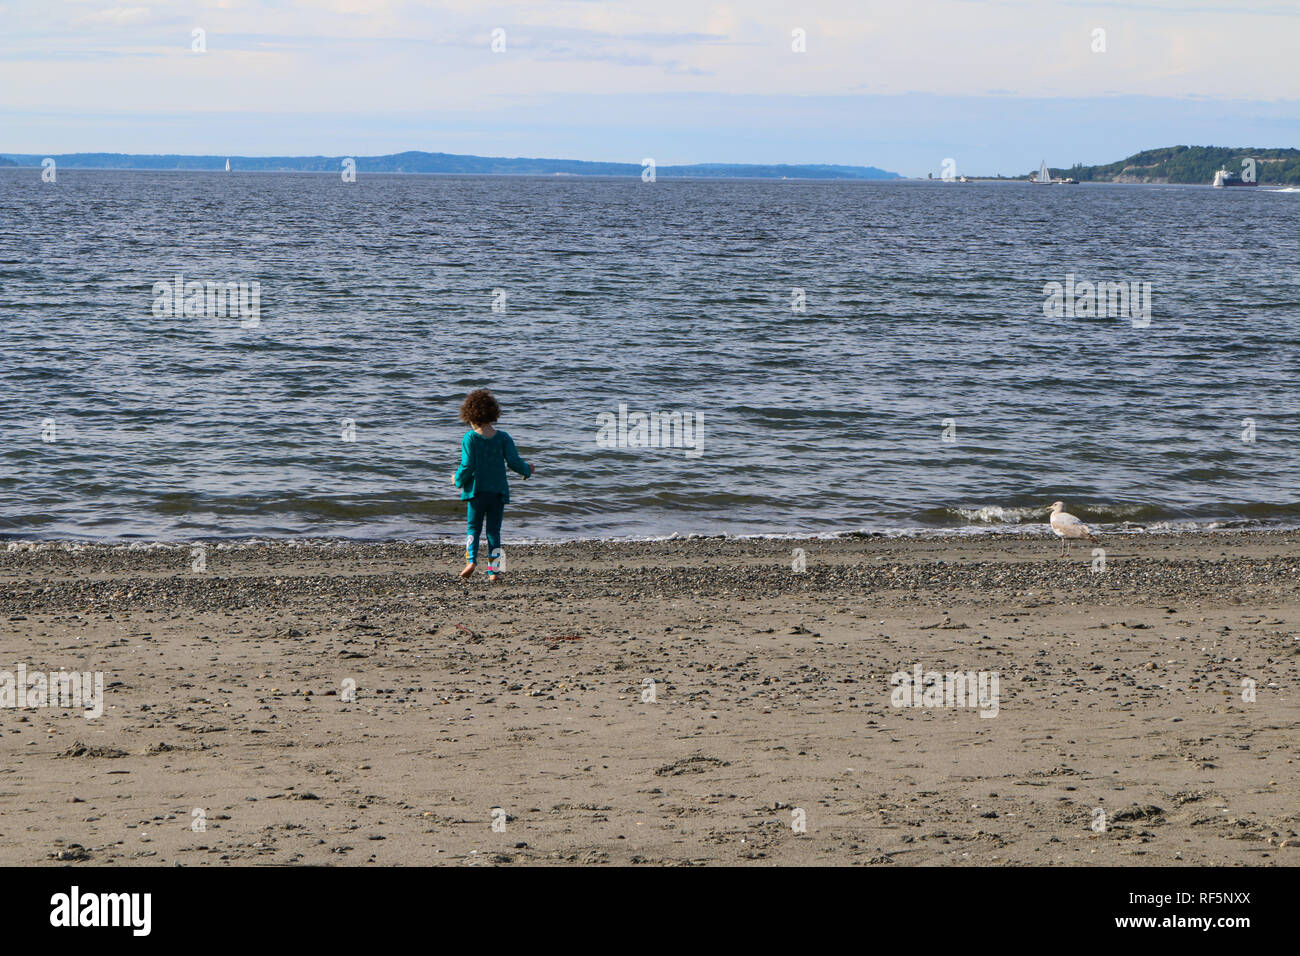 Child running at the shore of Alki Beach in West Seattle, Washington, chasing seagulls Stock Photo